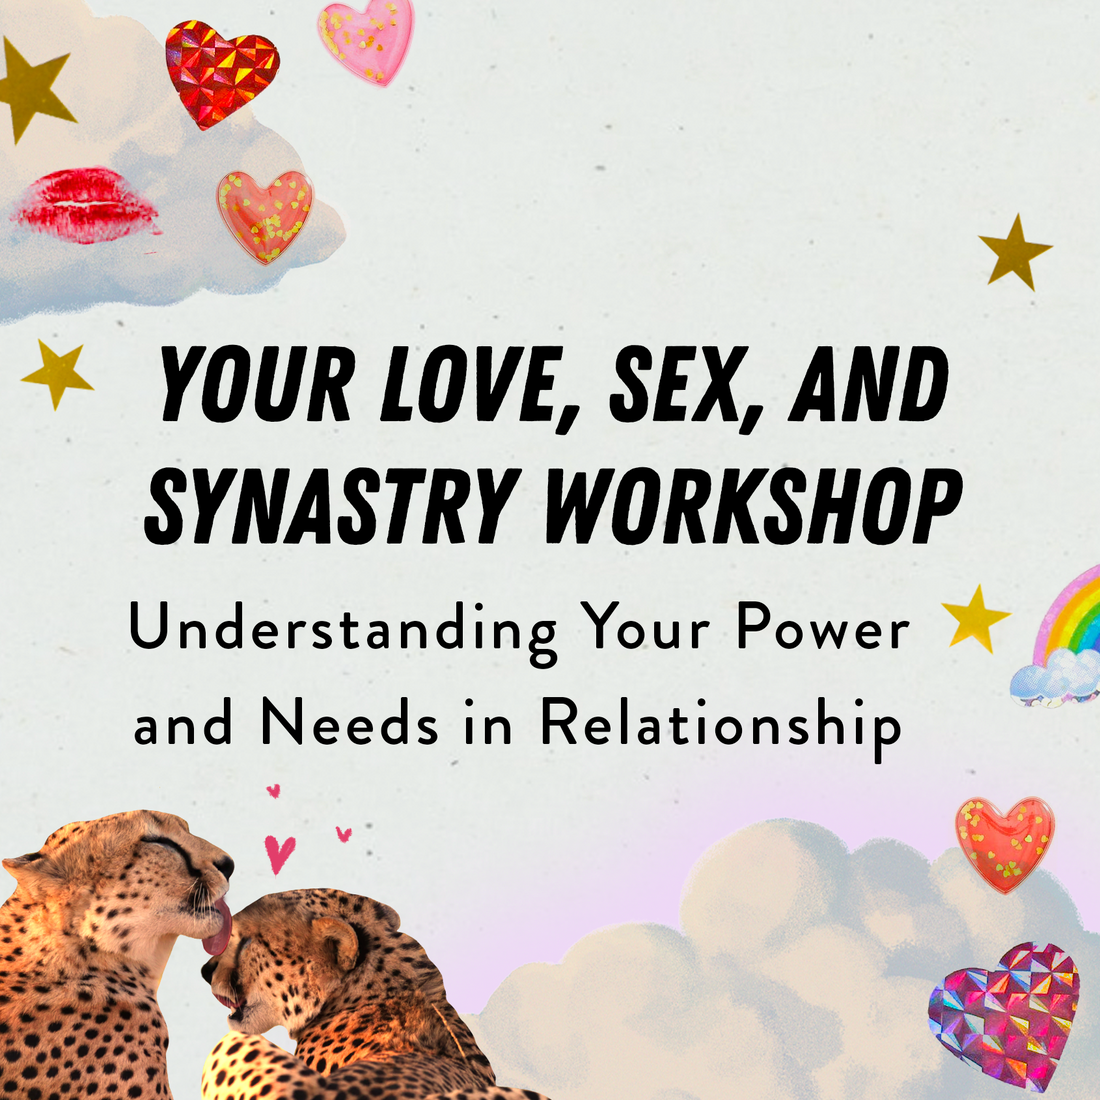 Your Love, Sex, and Synastry Workshop: Understanding Your Power and Needs in Relationship